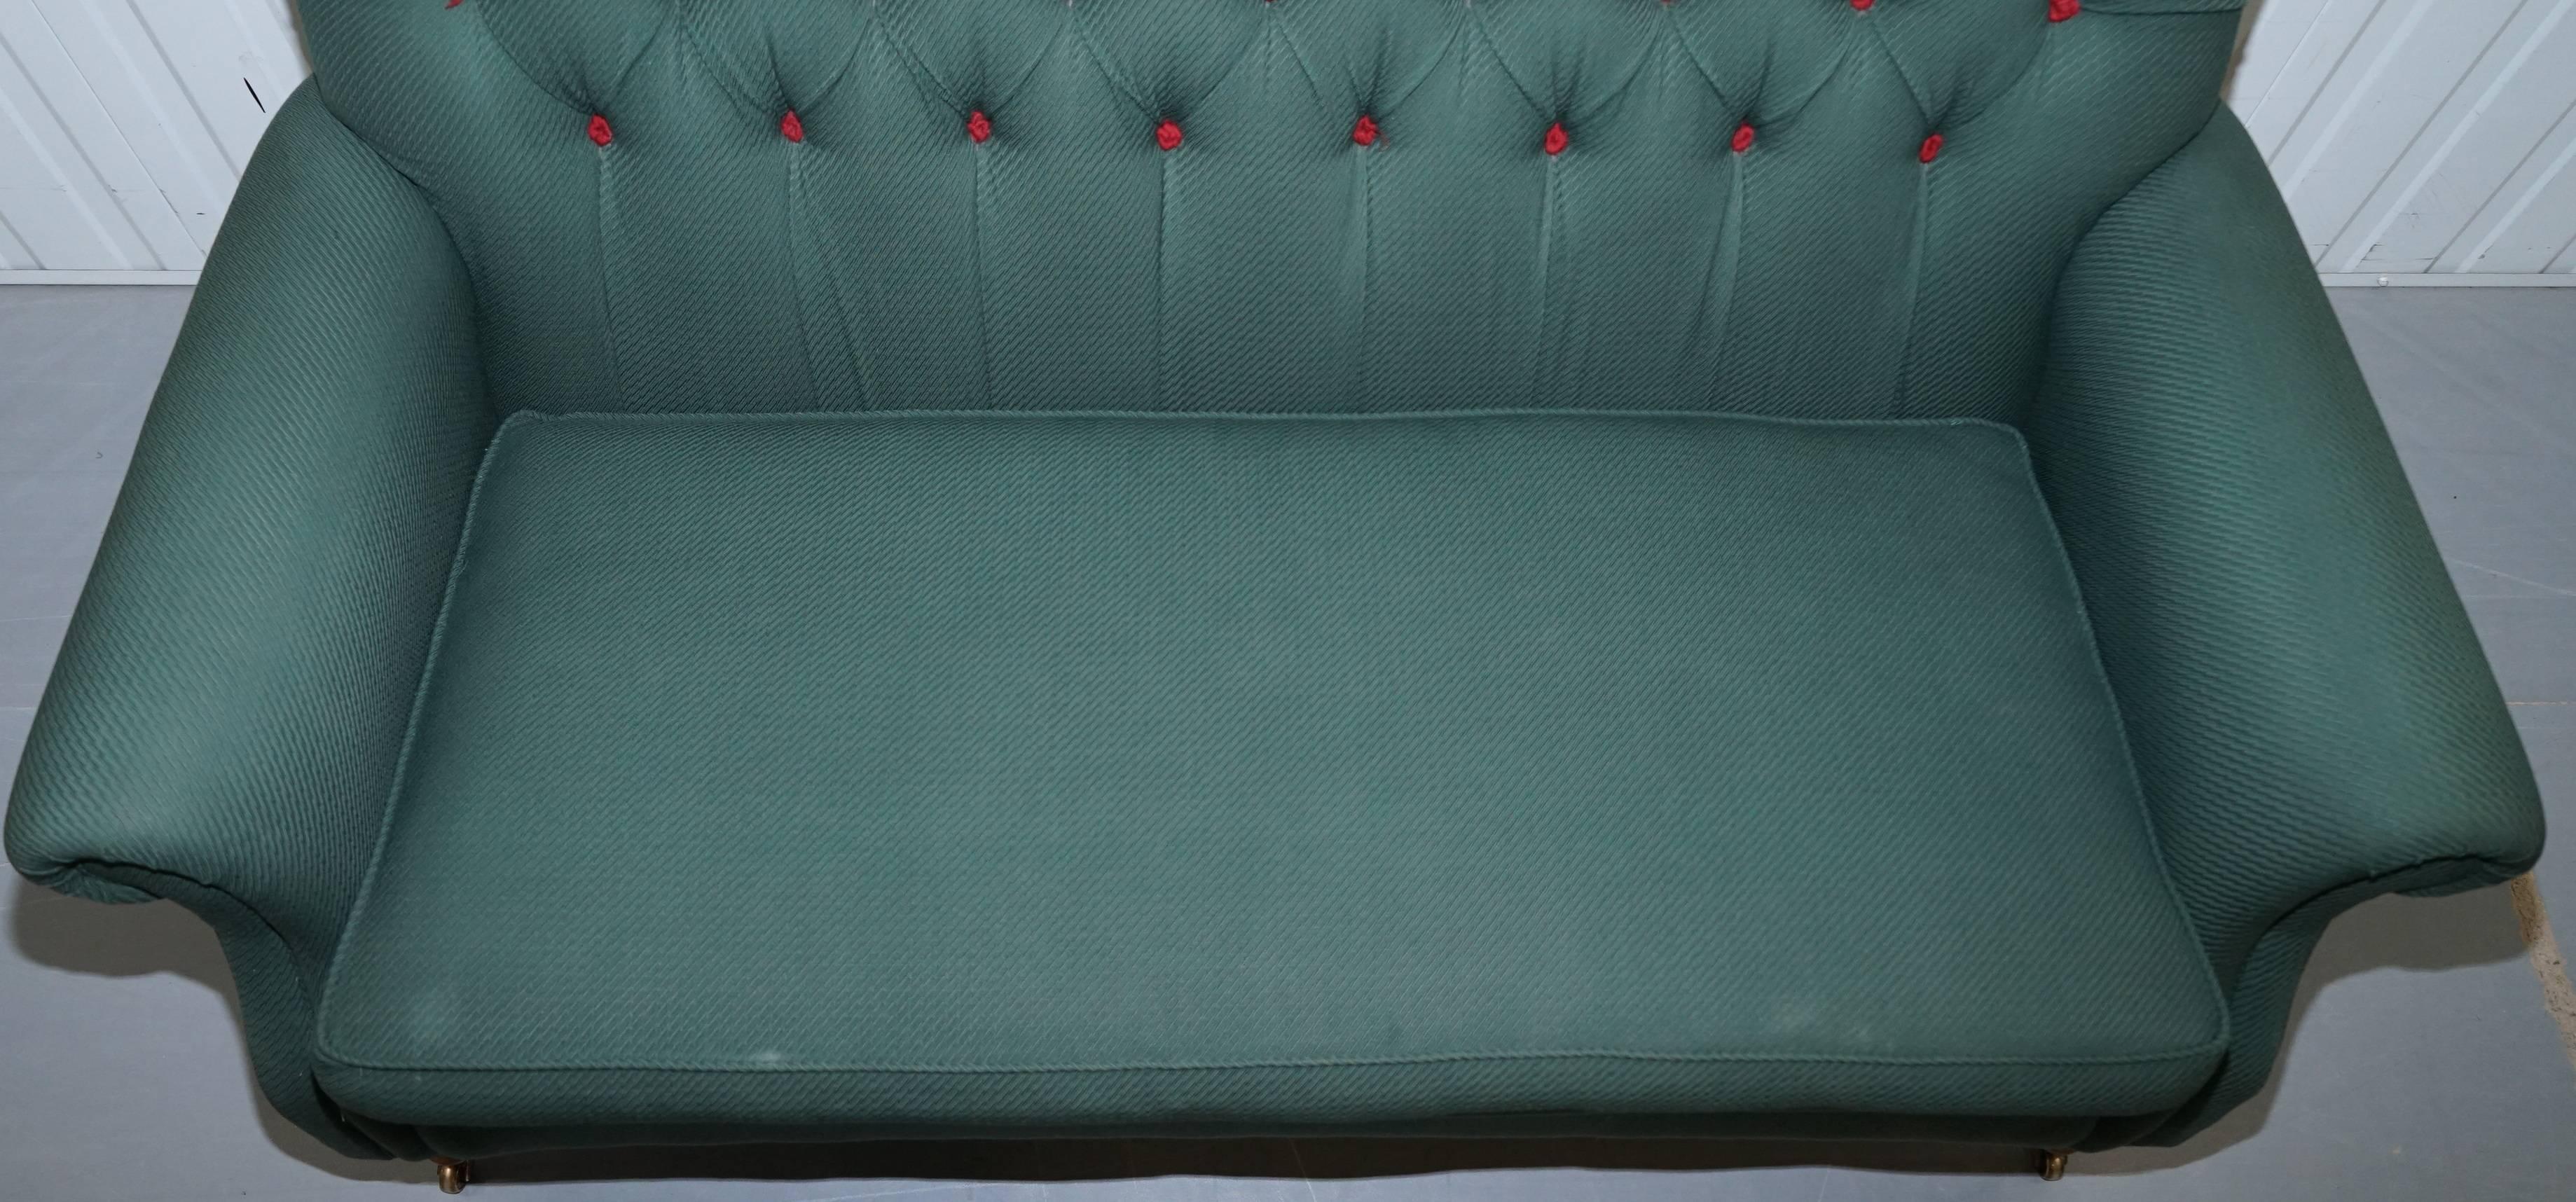 Victorian Wellington Model Howard Style Chesterfield Green Upholstery Two-Seat Bench Sofa